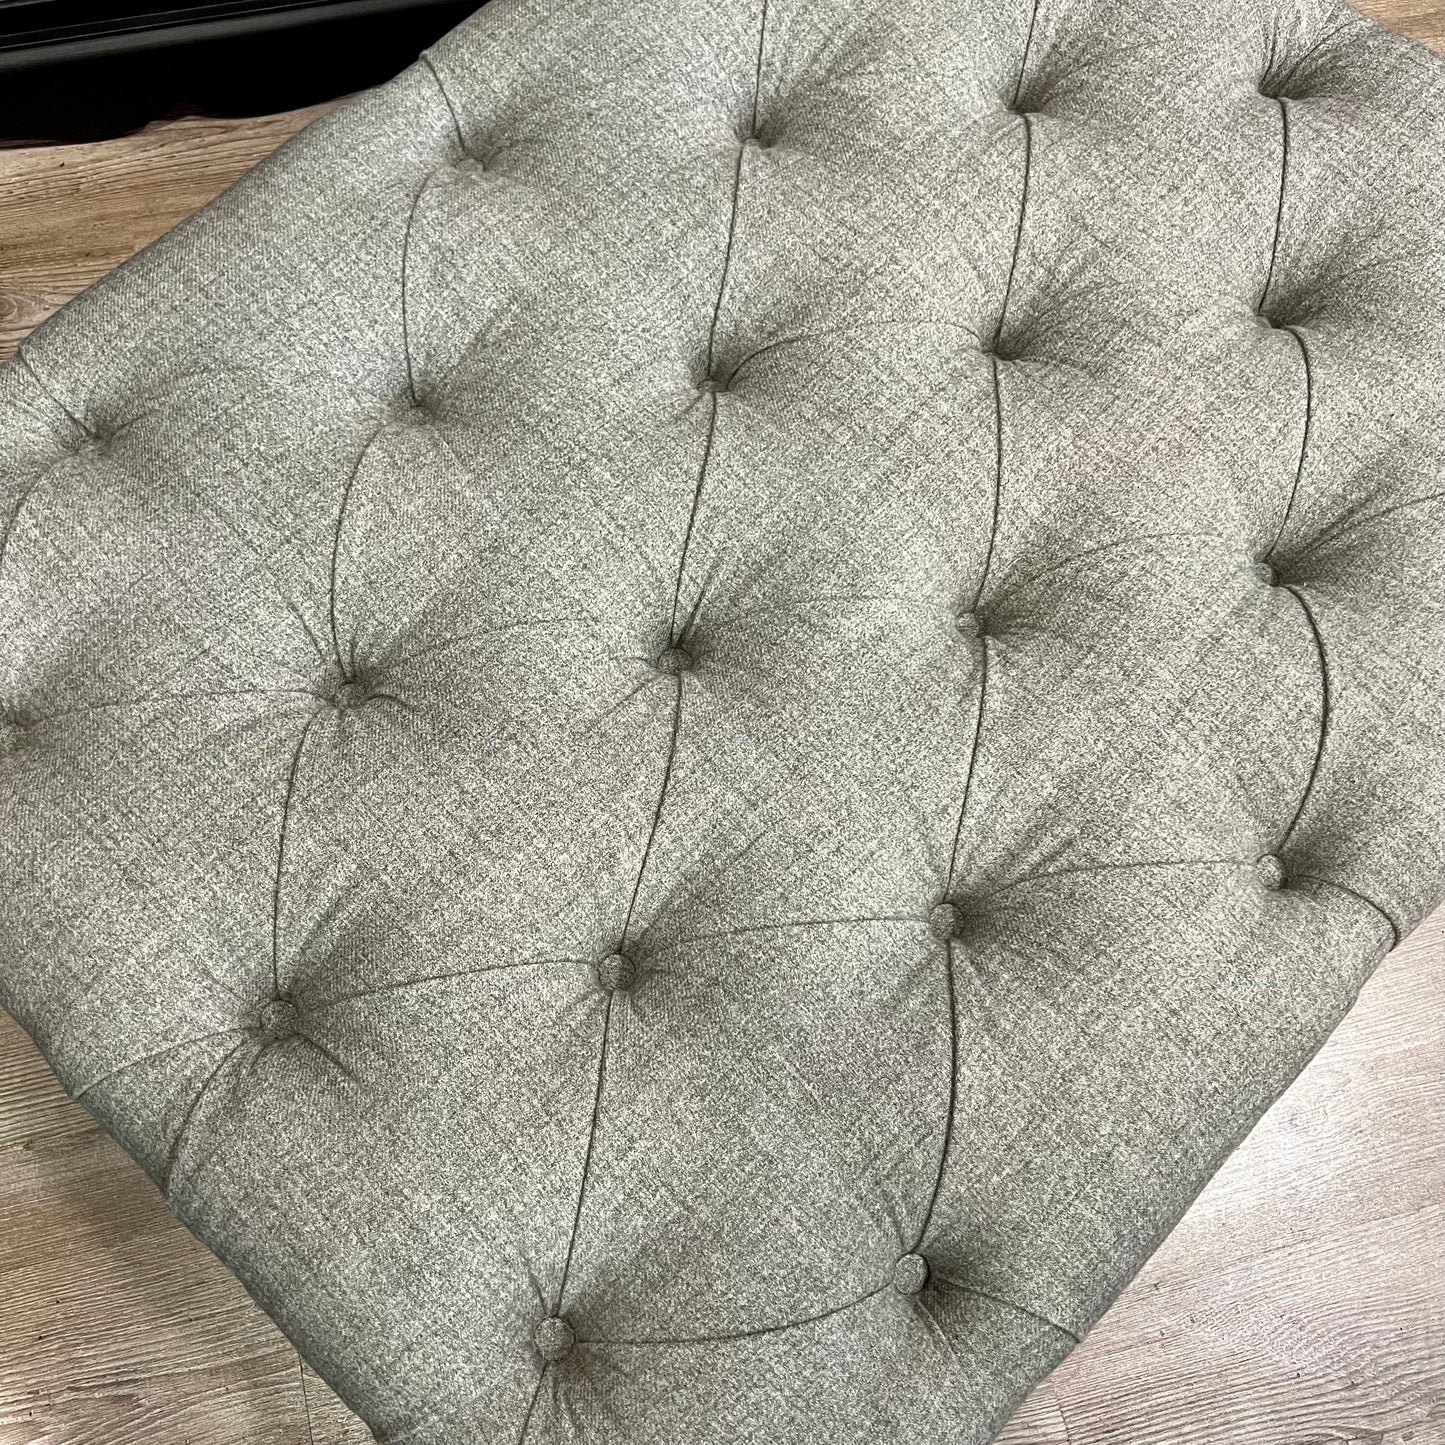 Buttoned Footstool Grey